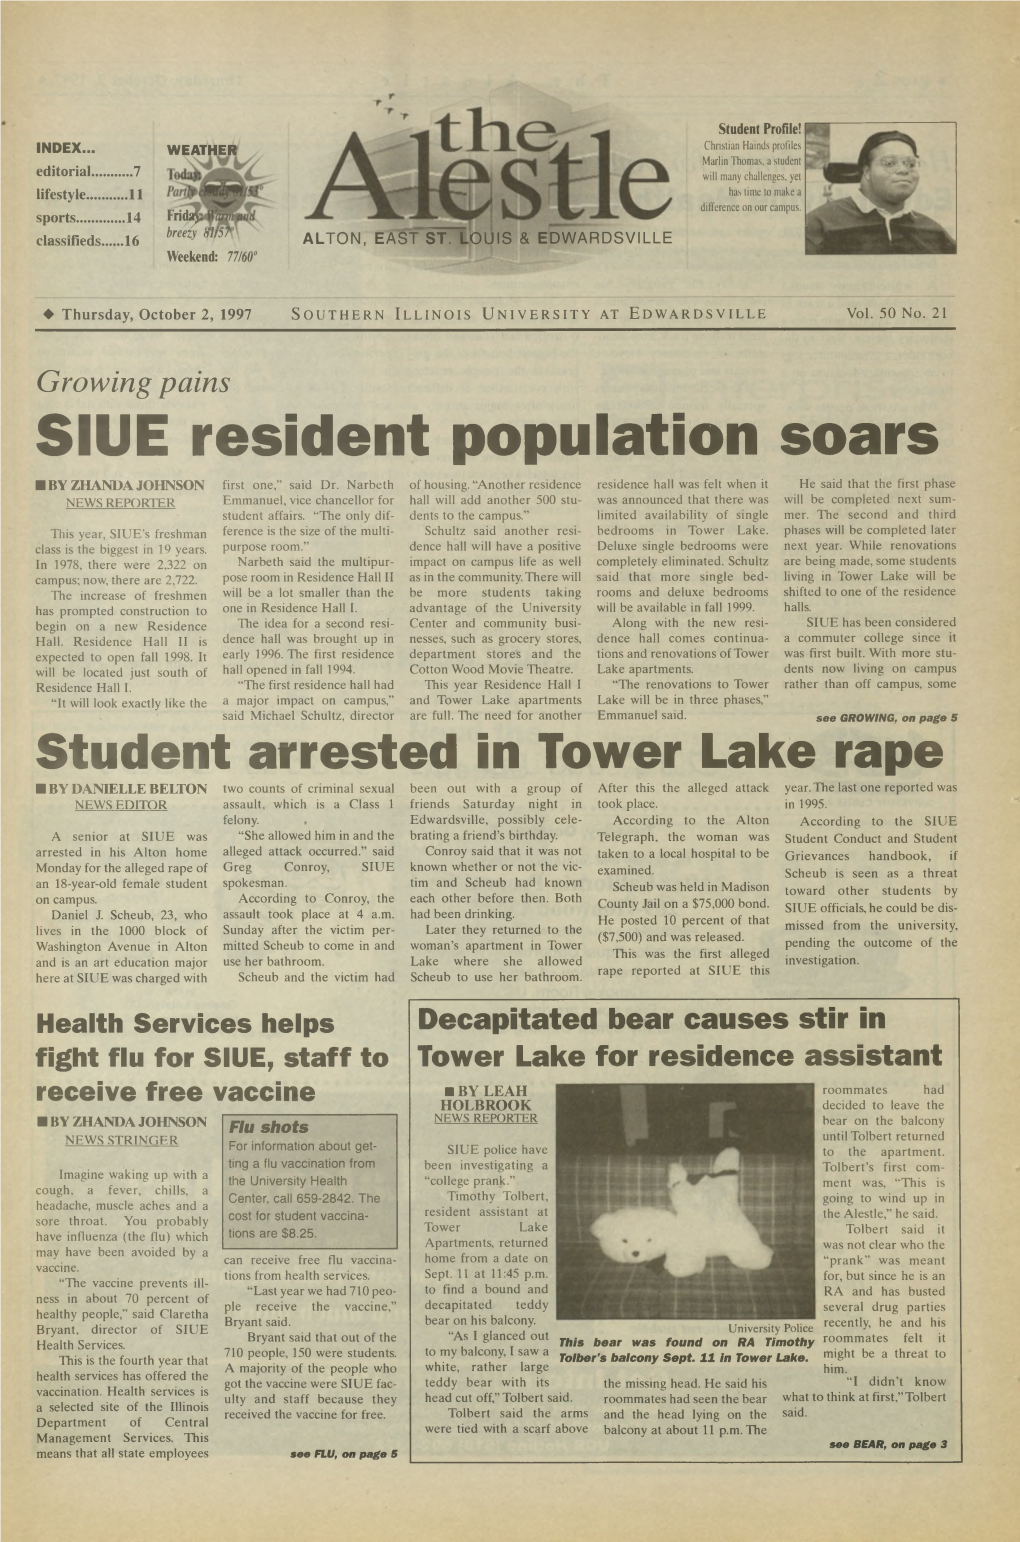 SIUE Resident Population Soars